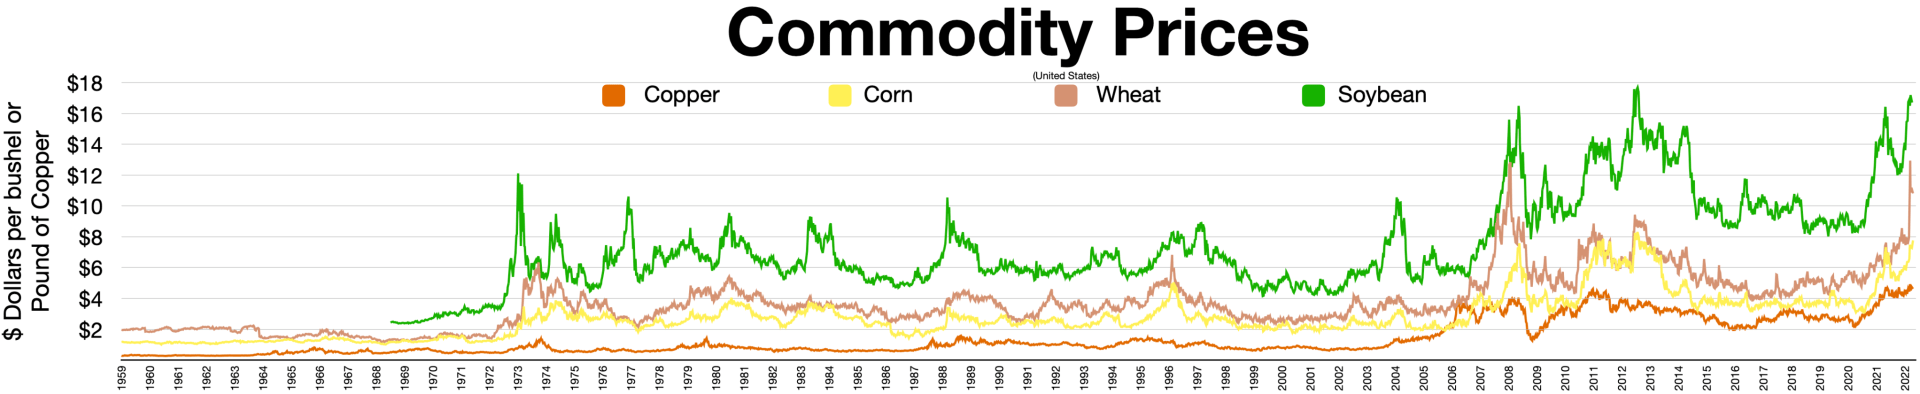 Commodity_Prices.webp.png